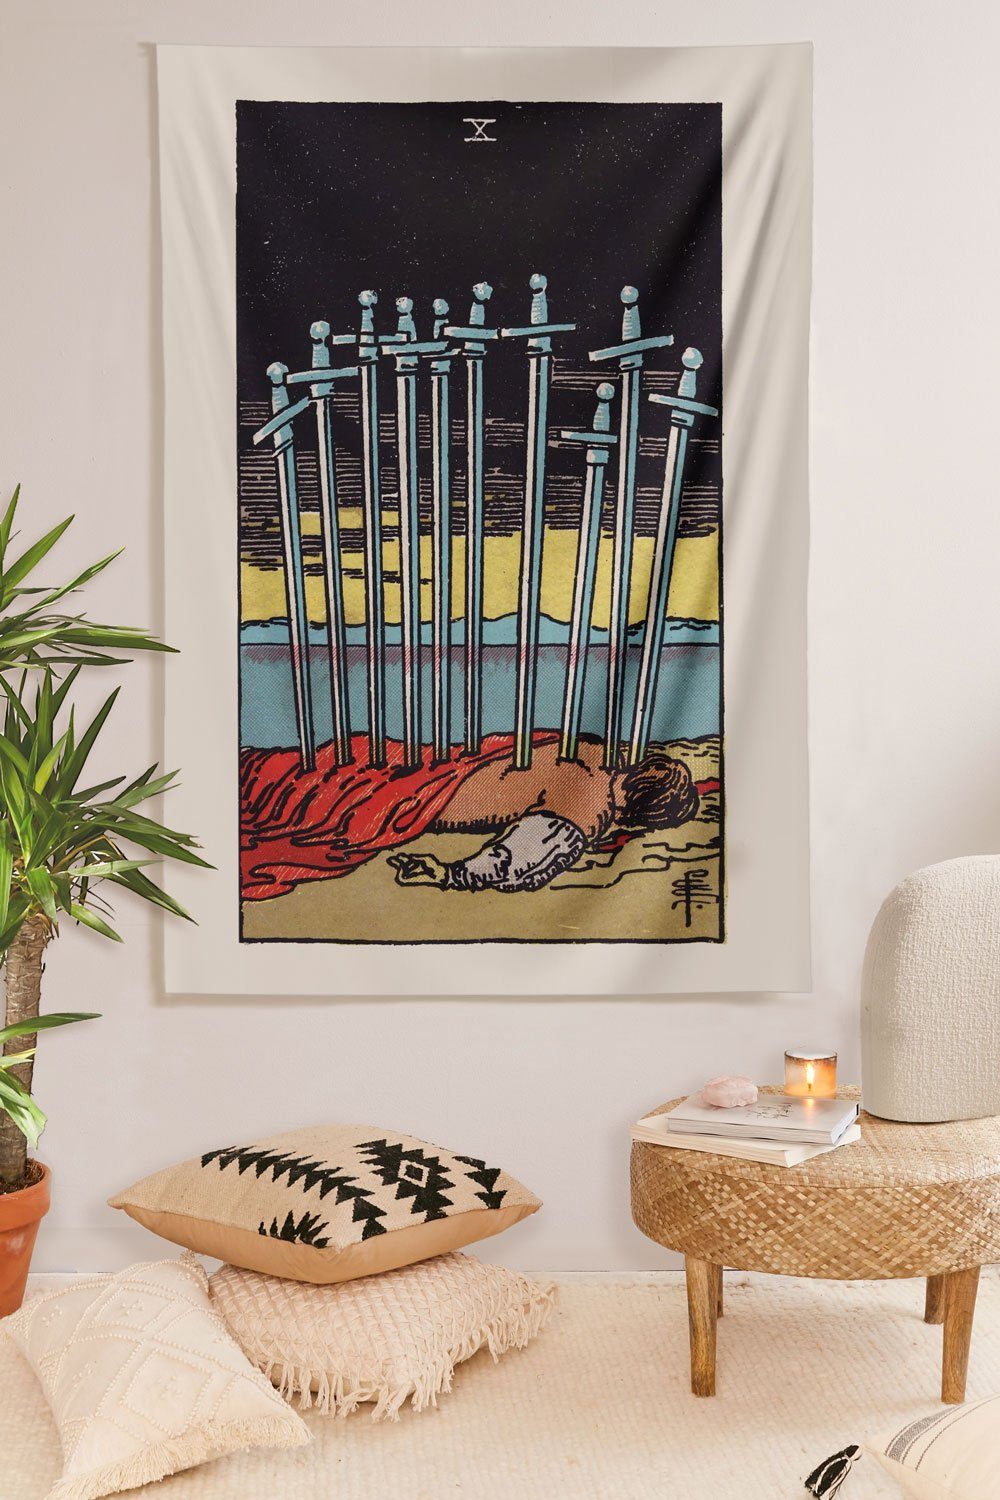 10 of Swords Tapestry tapestry NirvanaThreads 